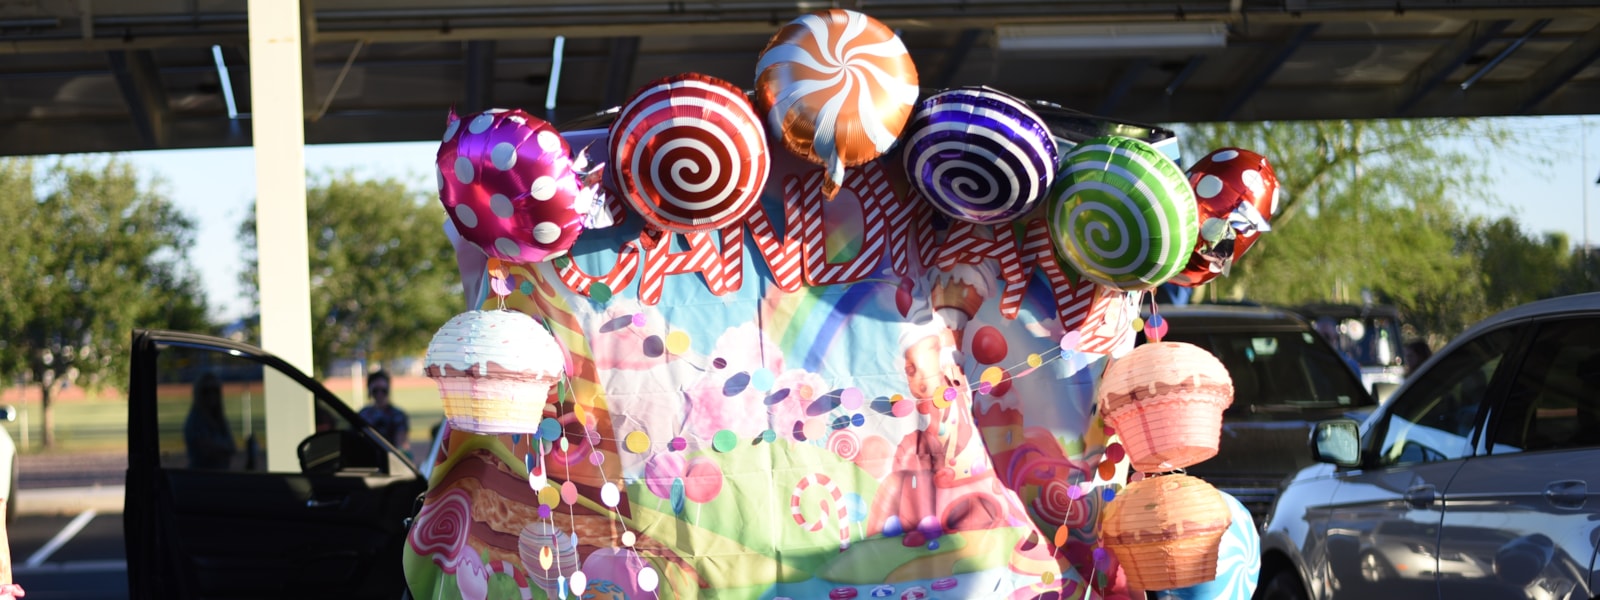 Candy Land Decorations on a Car